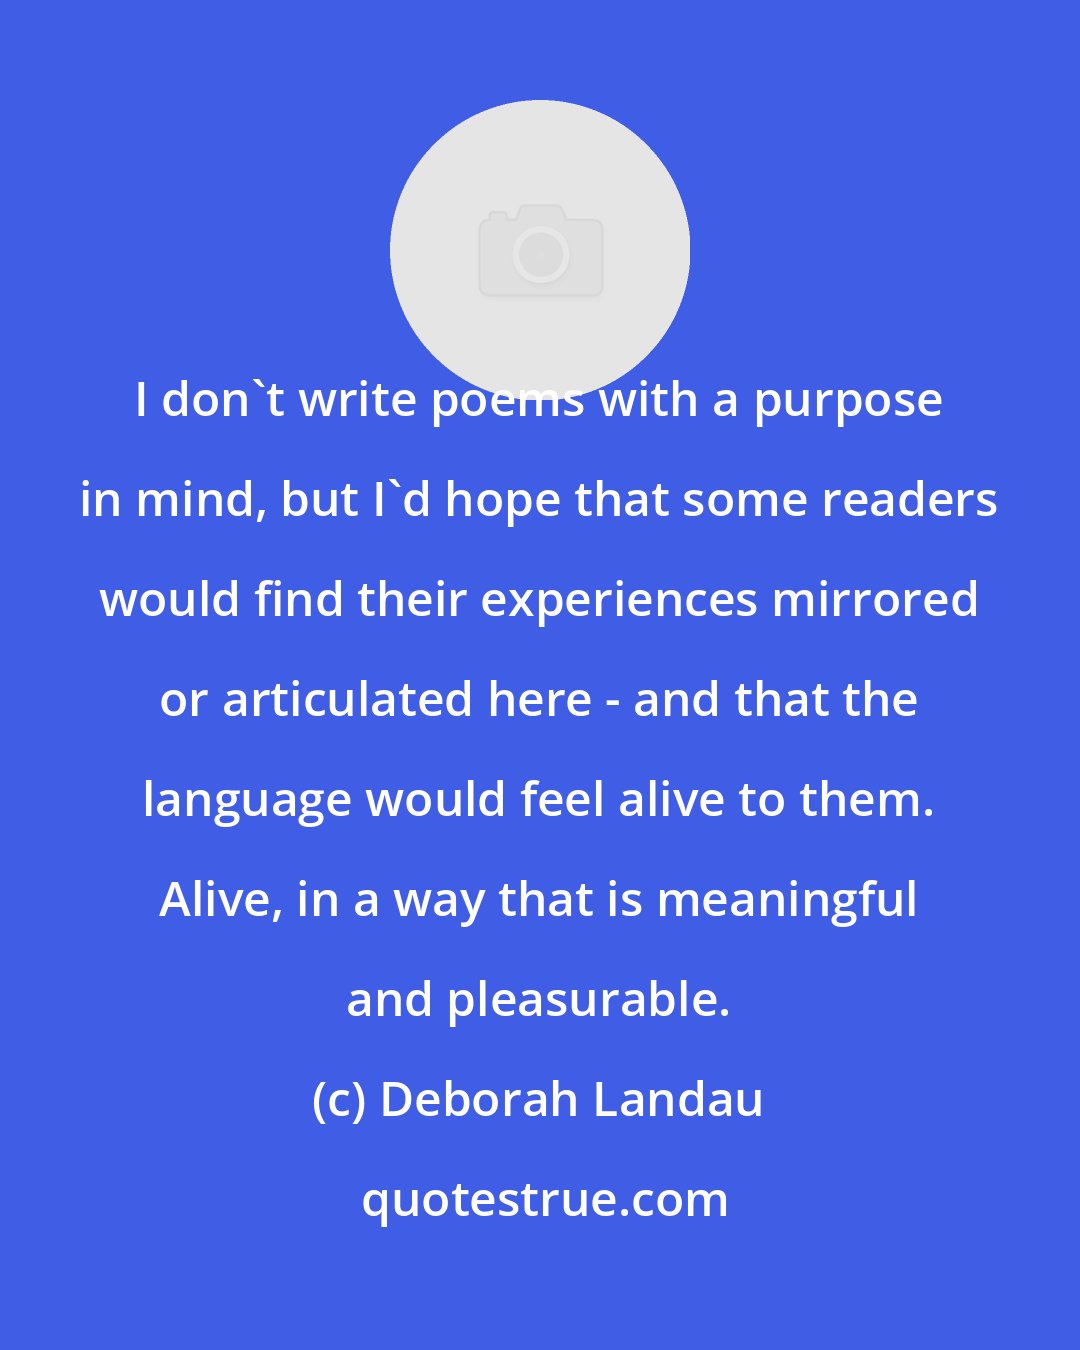 Deborah Landau: I don't write poems with a purpose in mind, but I'd hope that some readers would find their experiences mirrored or articulated here - and that the language would feel alive to them. Alive, in a way that is meaningful and pleasurable.